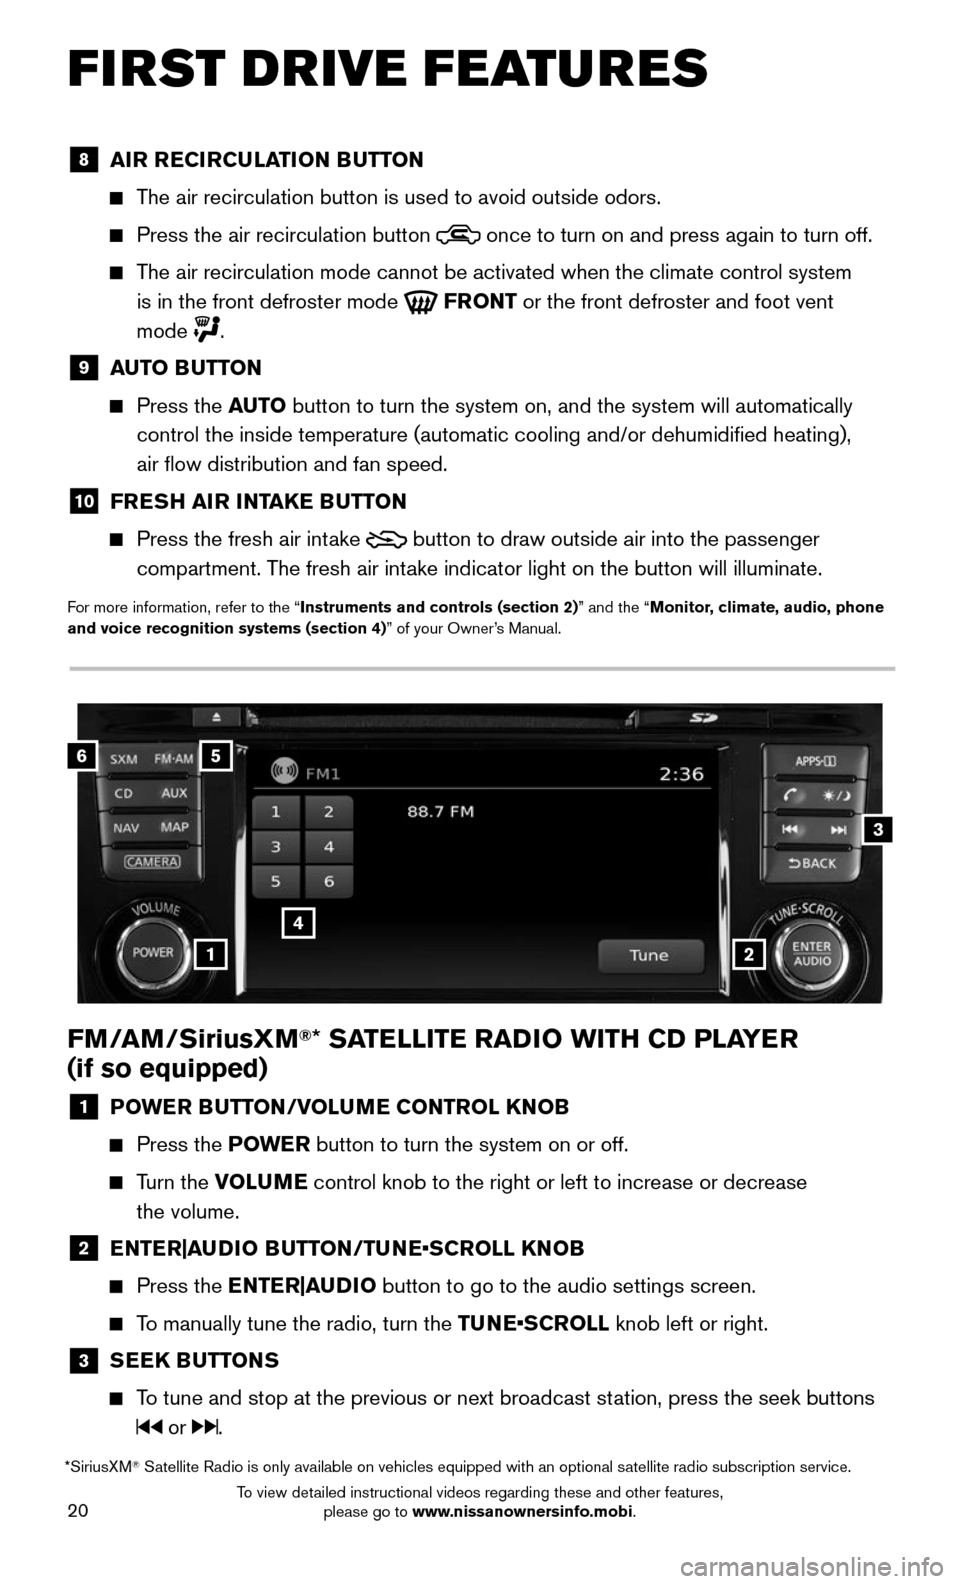 NISSAN ROGUE 2016 2.G Quick Reference Guide 20
FIRST DRIVE FEATURES
FM/AM/SiriusXM®* SATELLITE RADIO WITH CD PLAYER  
(if so equipped)
1 POWER BUTTON/VOLUME CONTROL KNOB
   Press the POWE R  button to turn the system on or off.
     Turn  the 